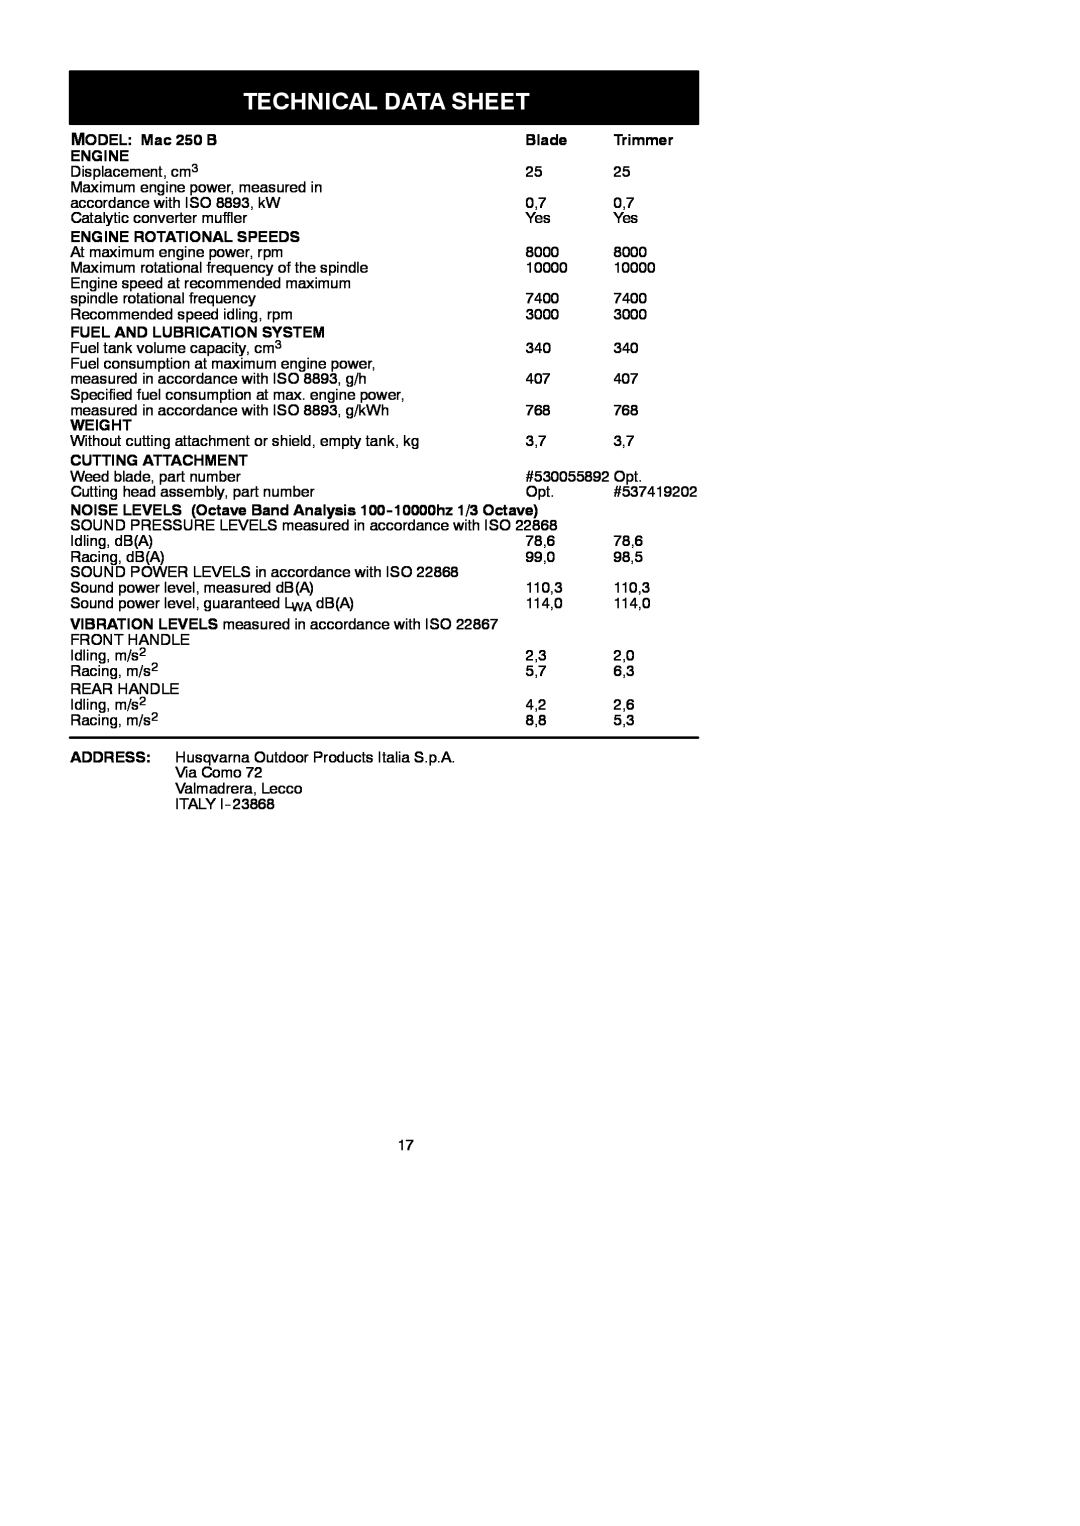 McCulloch Technical Data Sheet, Engine Rotational Speeds, Fuel And Lubrication System, Weight, MODEL Mac 250 B 